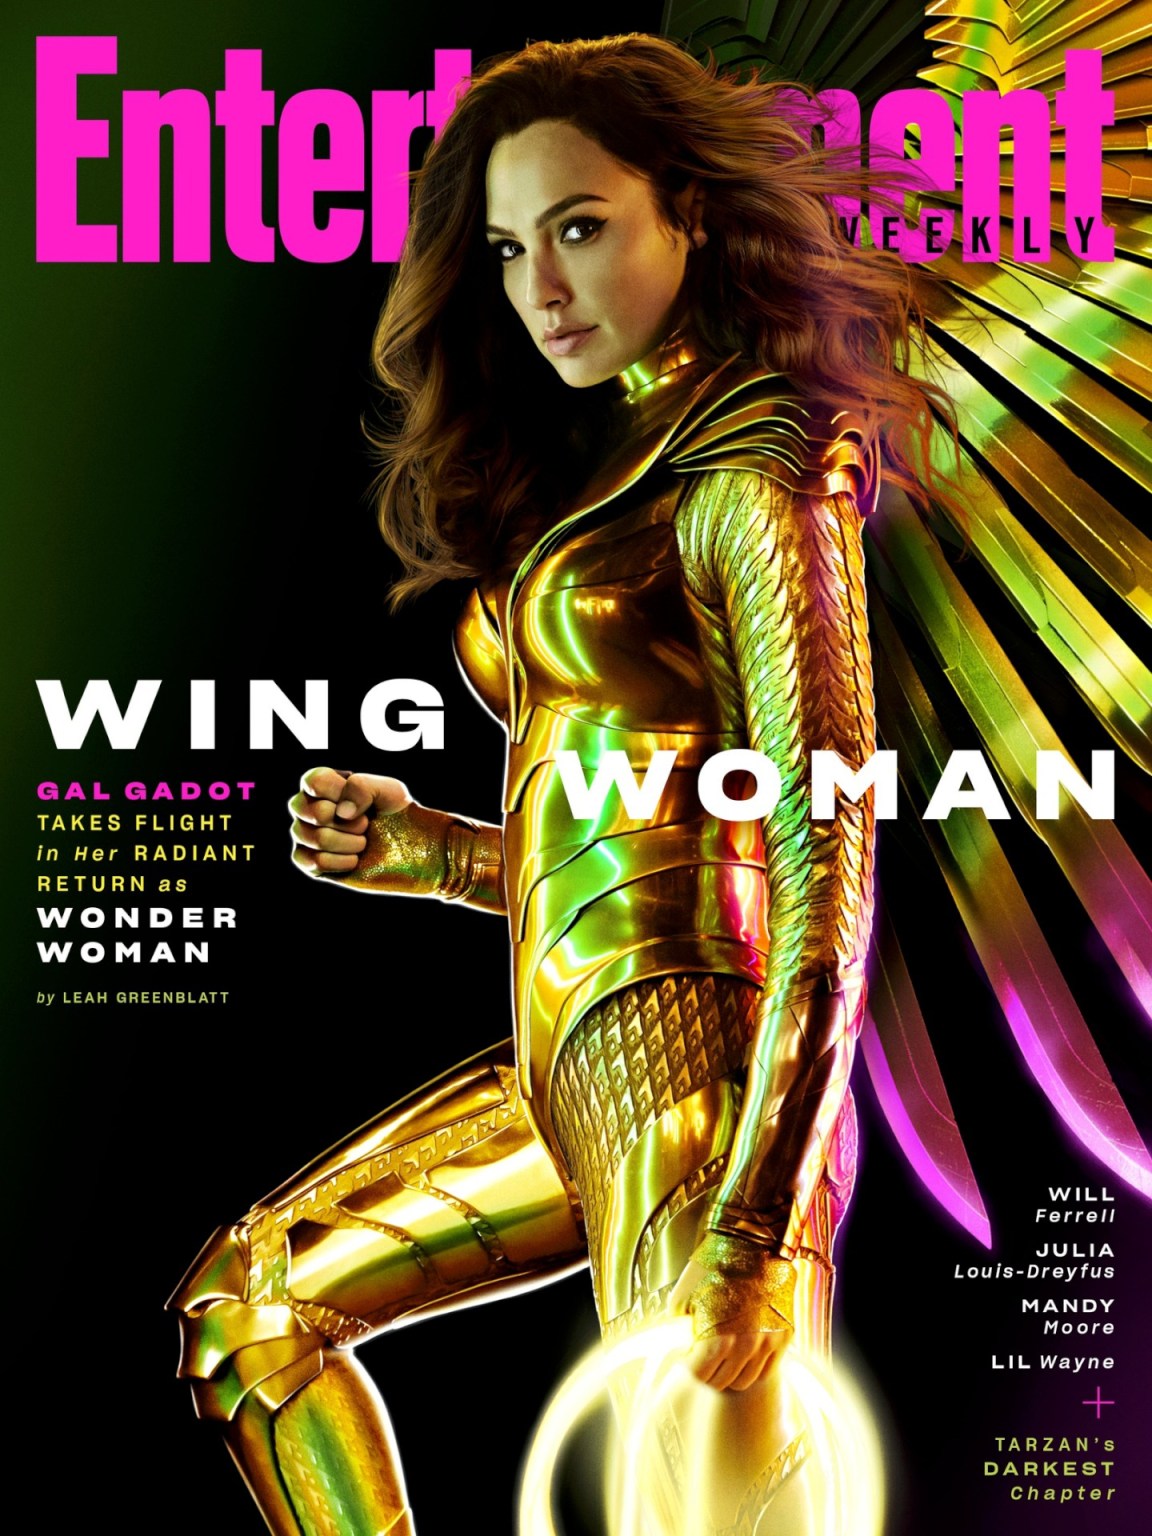 Wonder Woman - Gal Gadot on the cover of Entertainment Weekly - See the